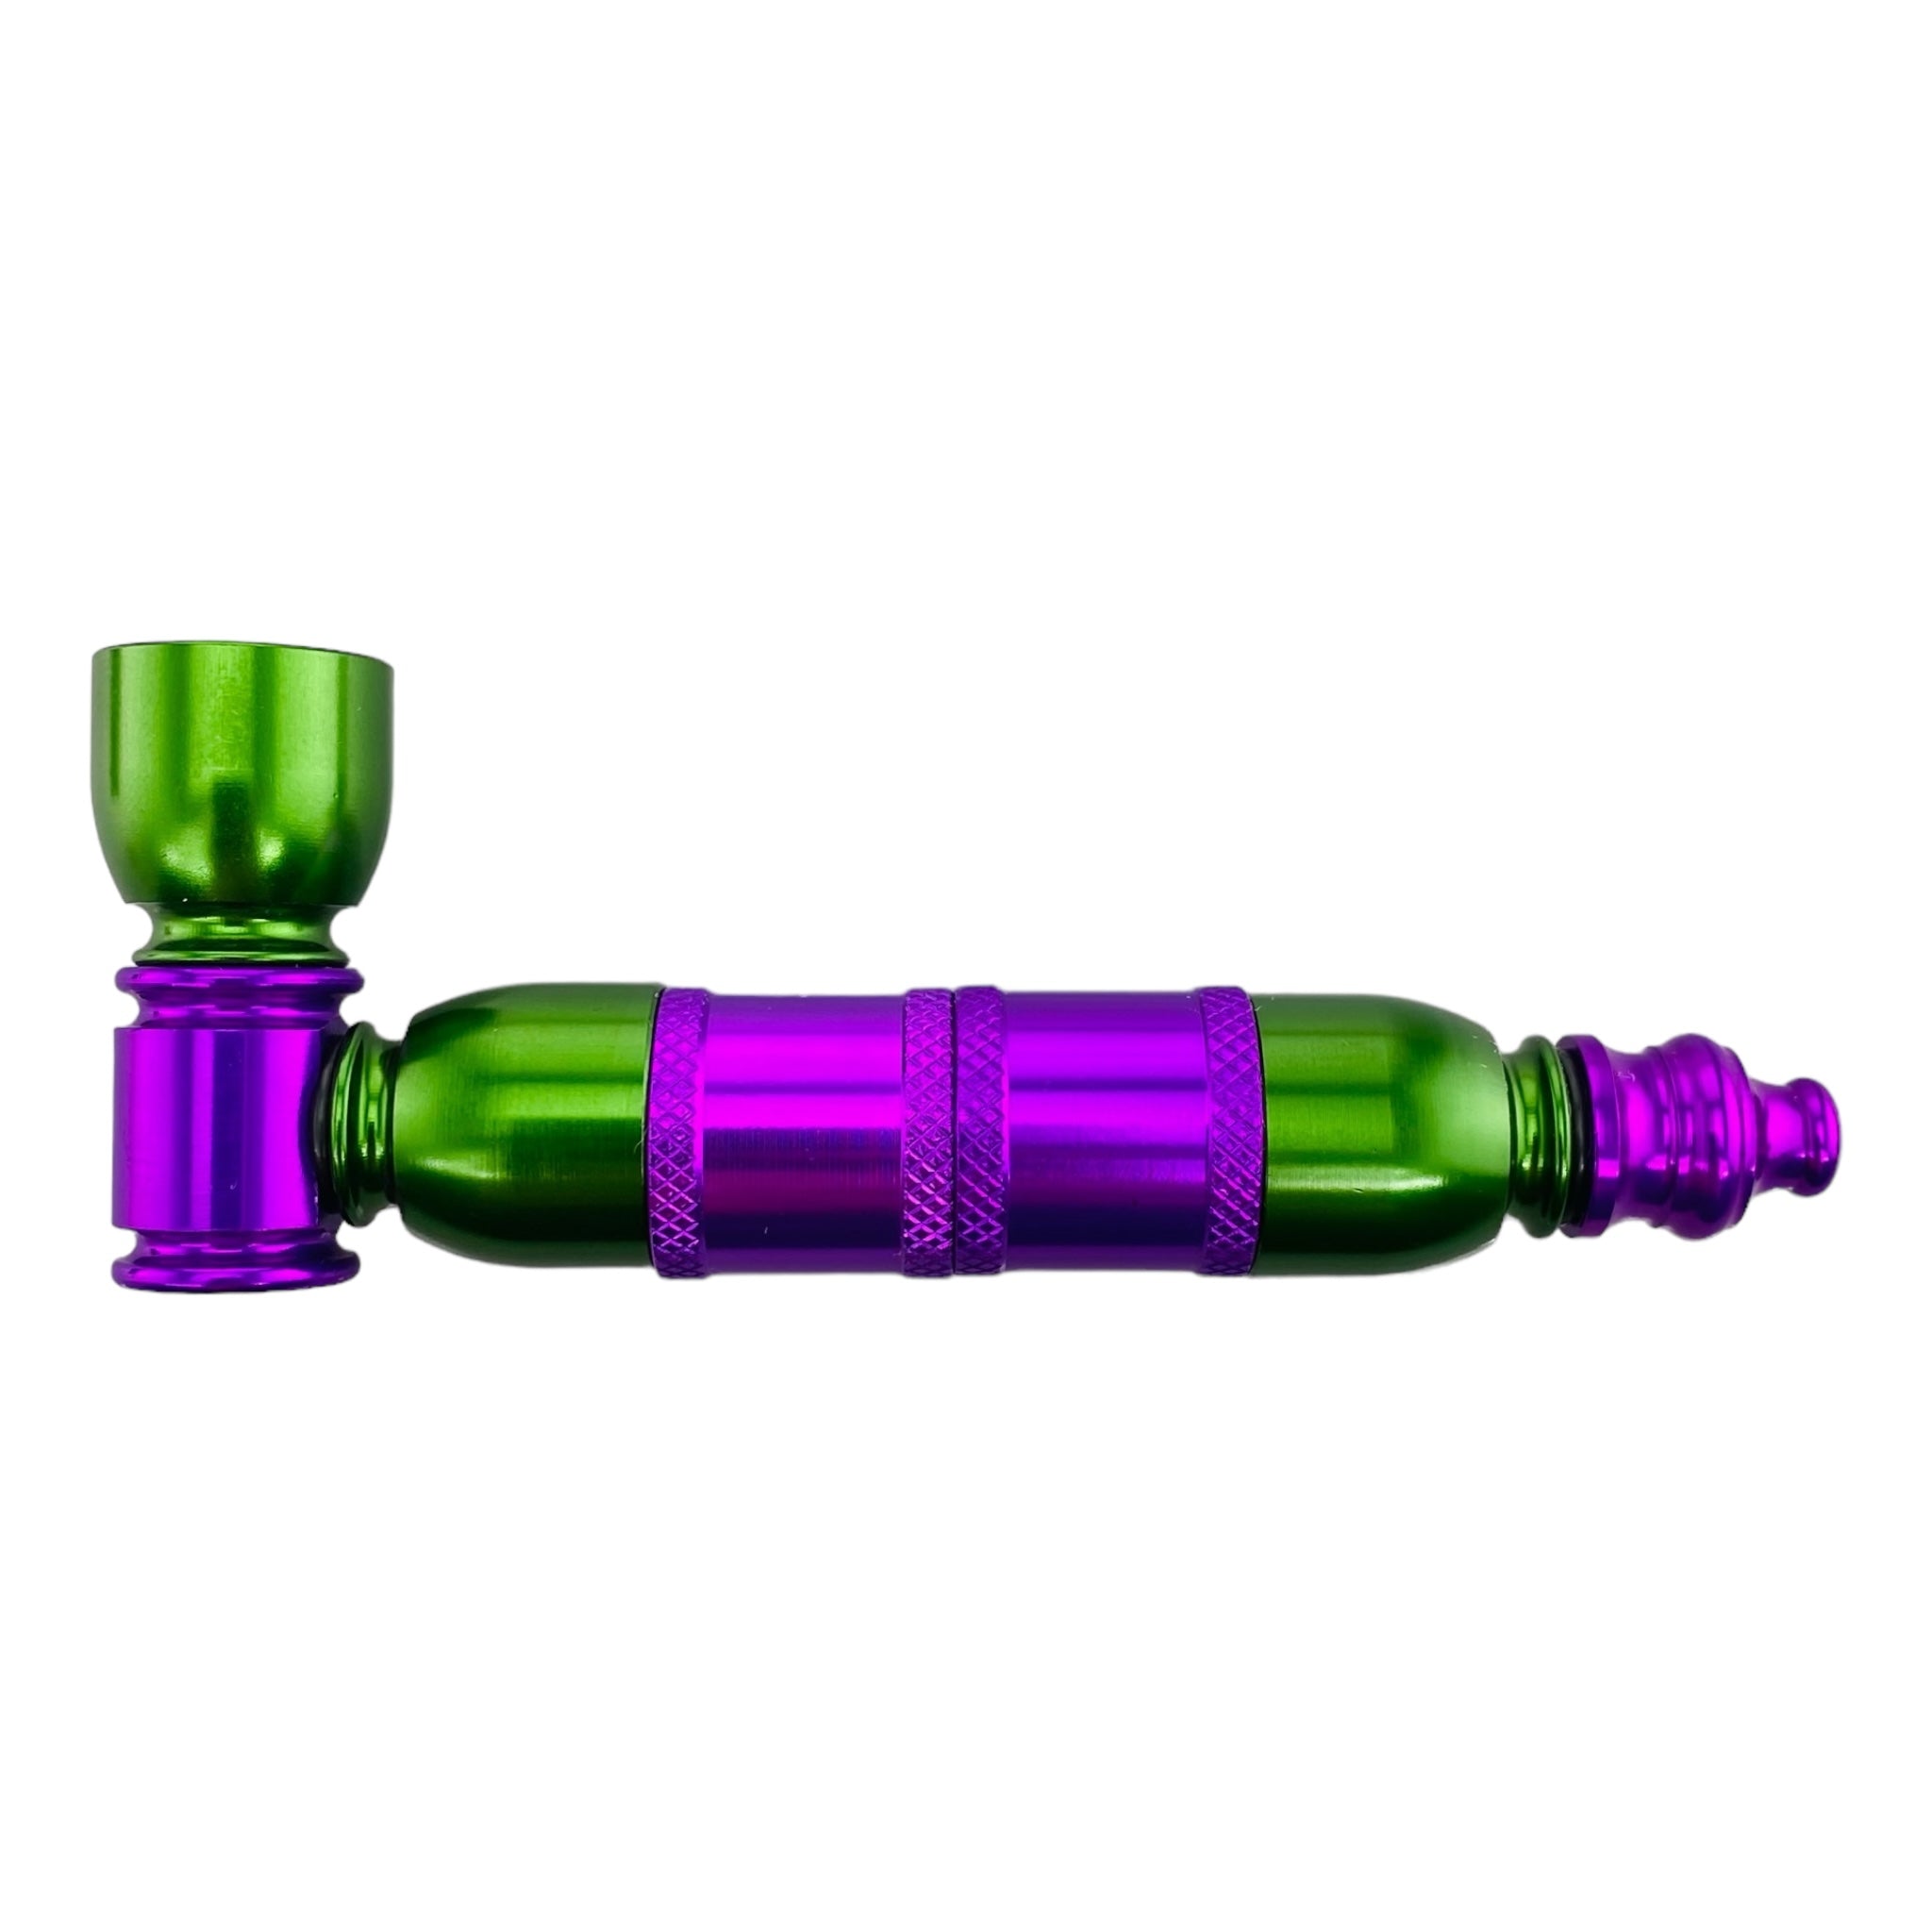 aluminum metal hand pipe for smoking weed pot cannabis or tobacco with multiple chambers for sale